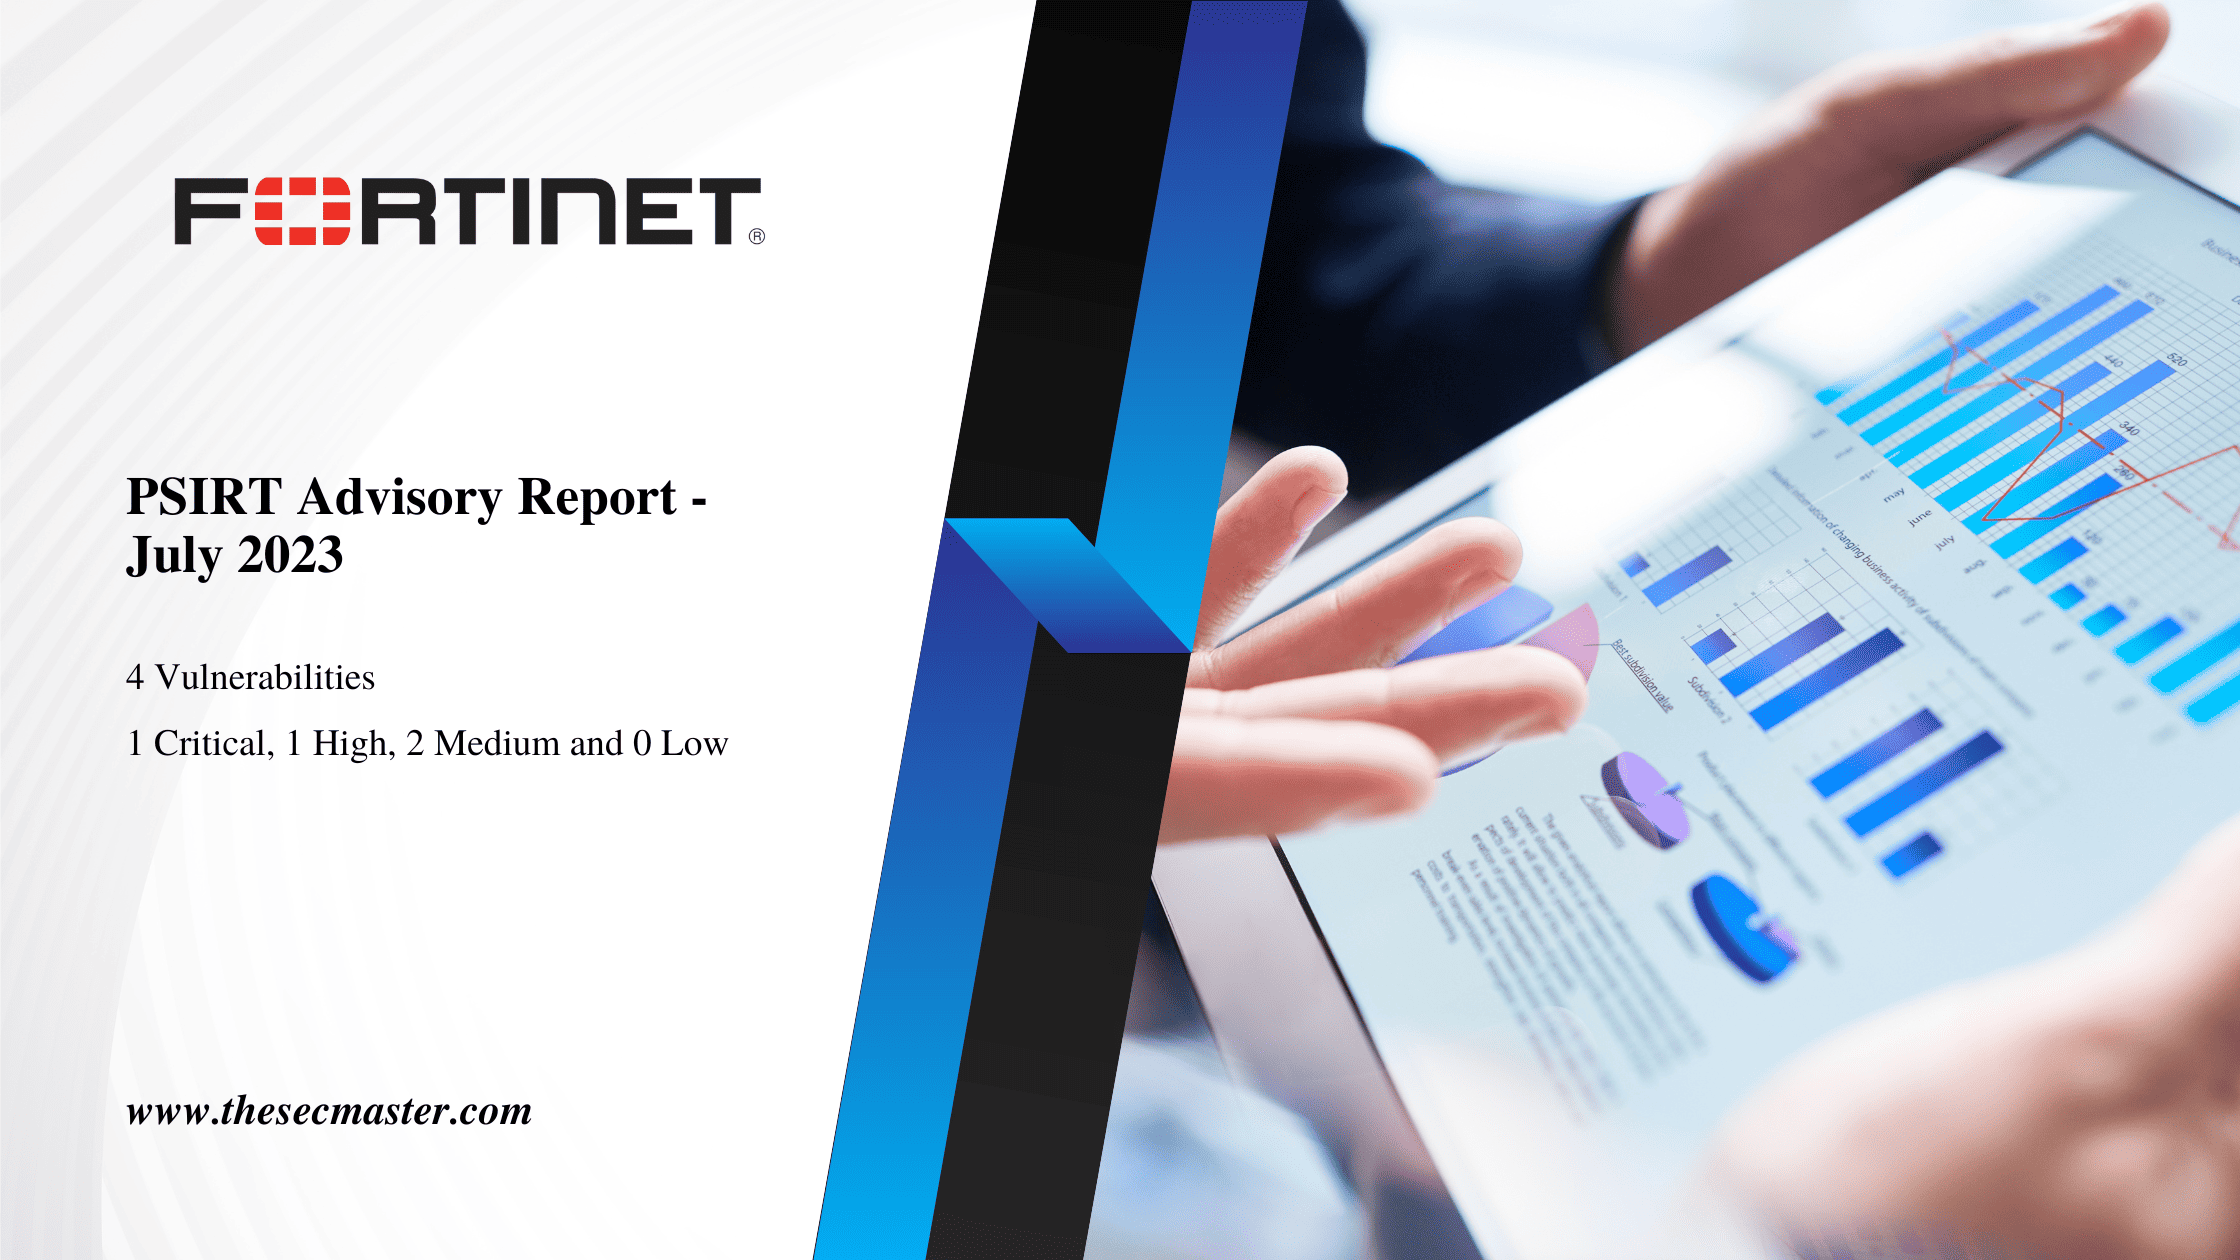 Breaking Down The Latest July 2023 Monthly Psirt Advisory Report From Fortinet